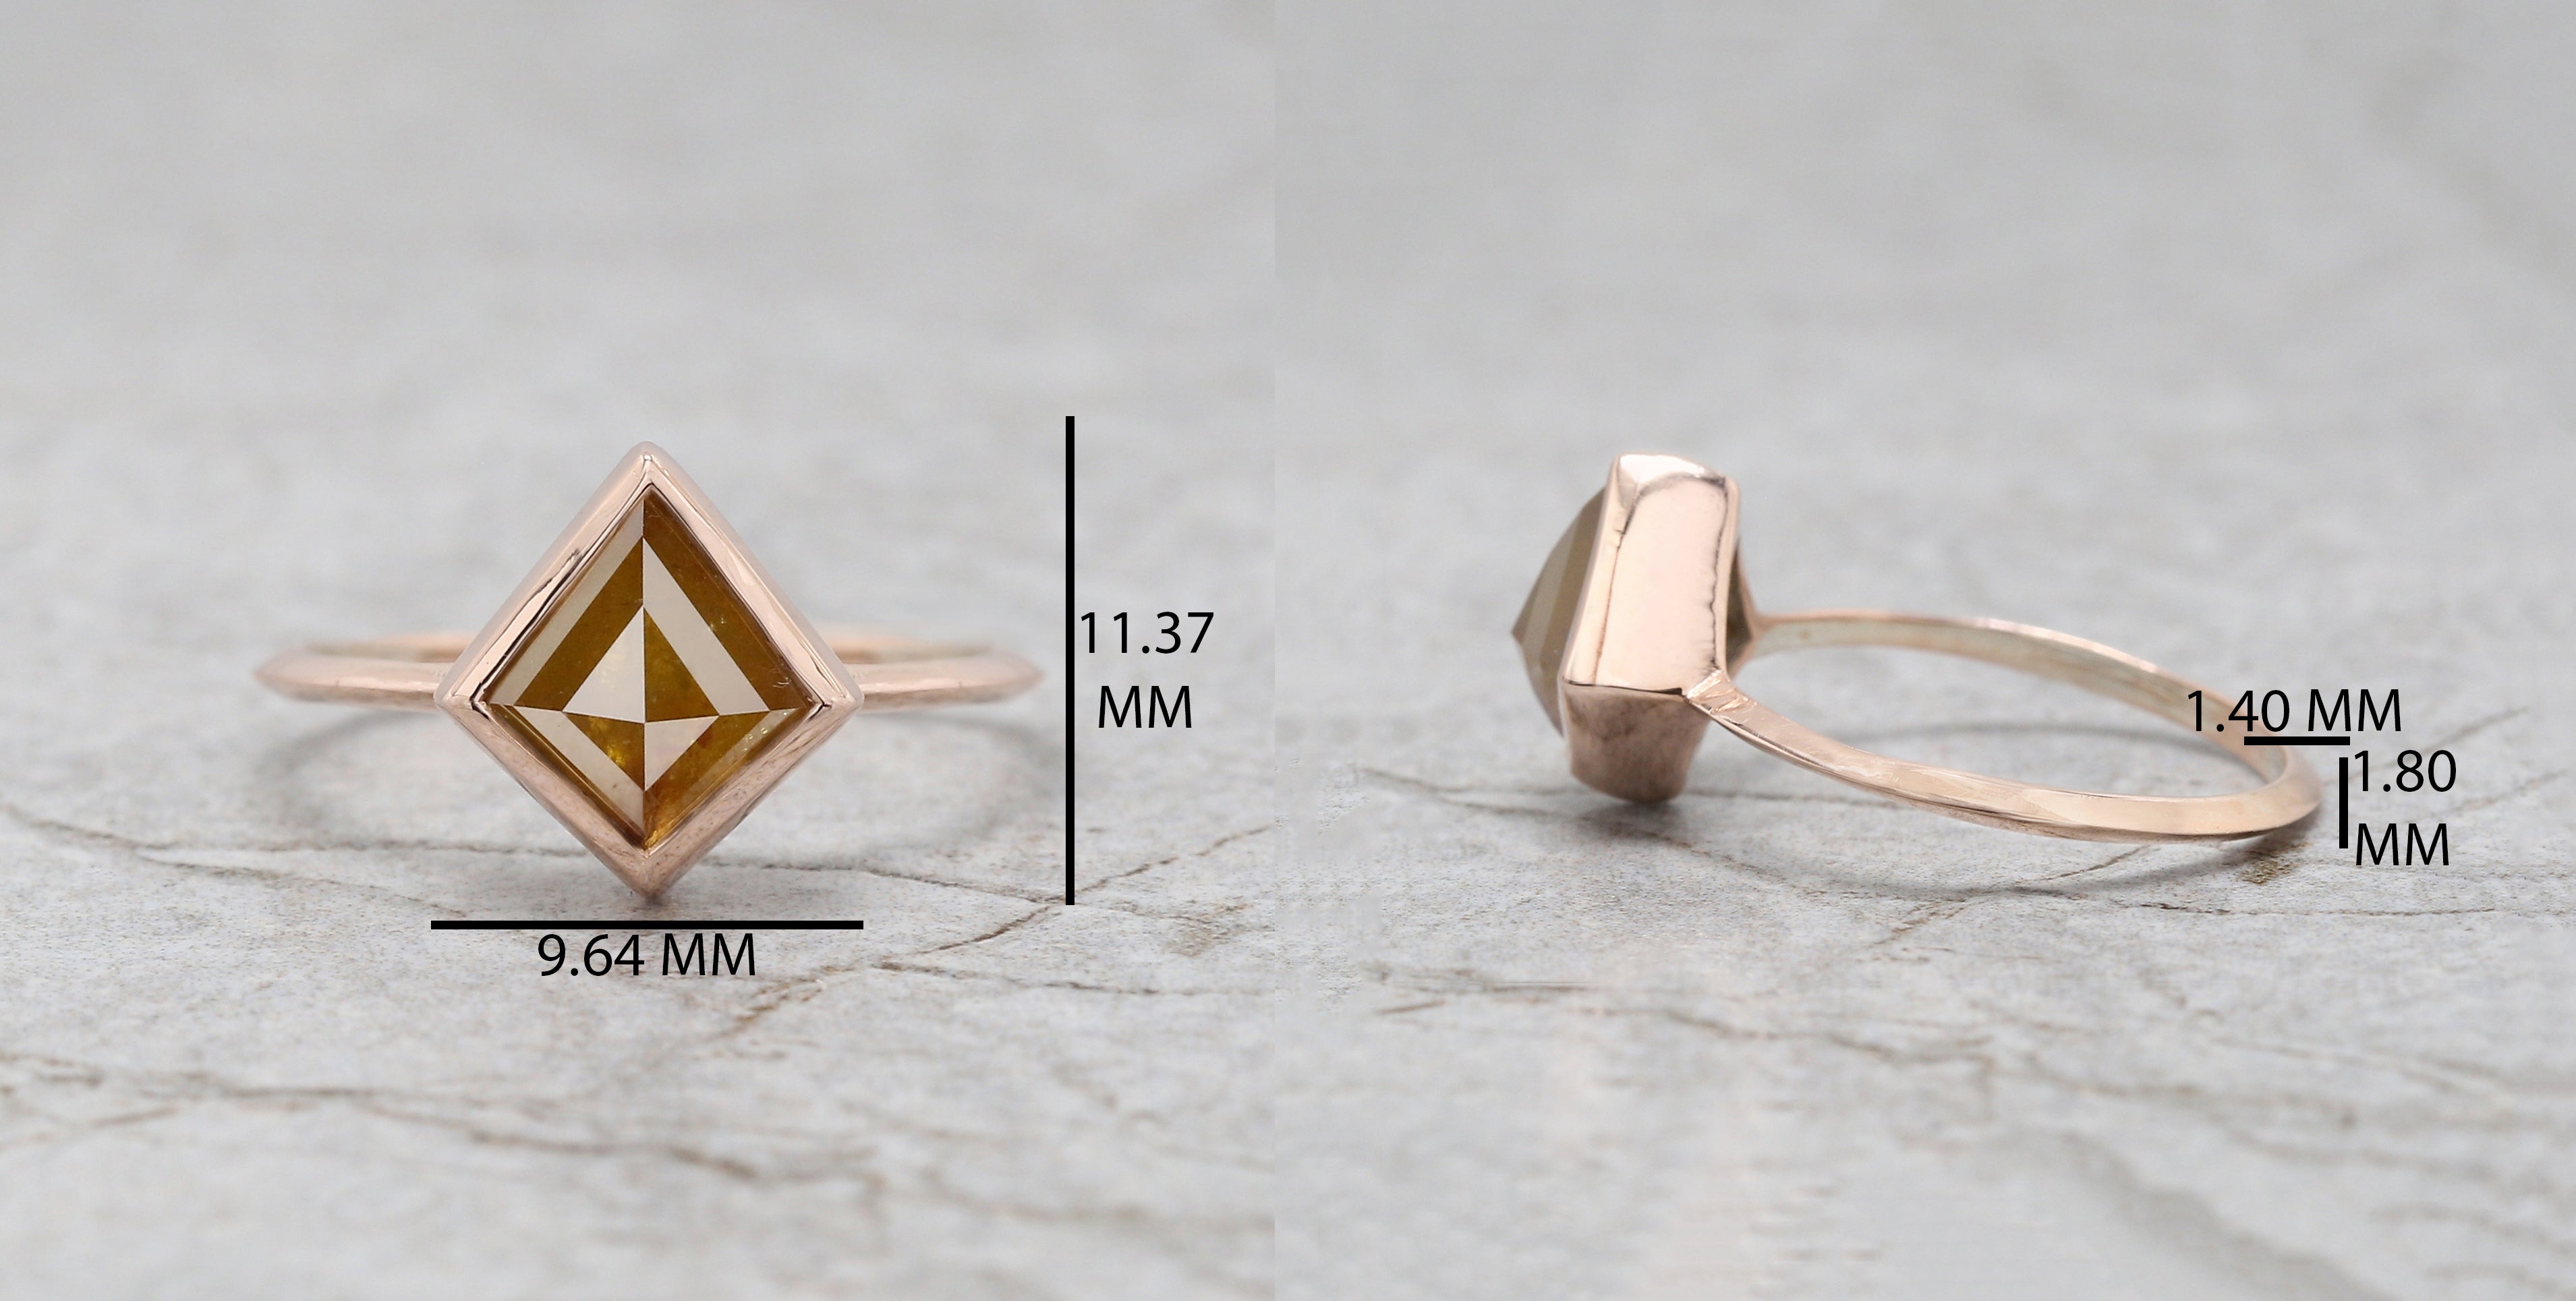 Kite Cut Yellow Color Diamond Ring 1.74 Ct 9.00 MM Kite Diamond Ring 14K Solid Rose Gold Silver Kite Engagement Ring Gift For Her QK2184